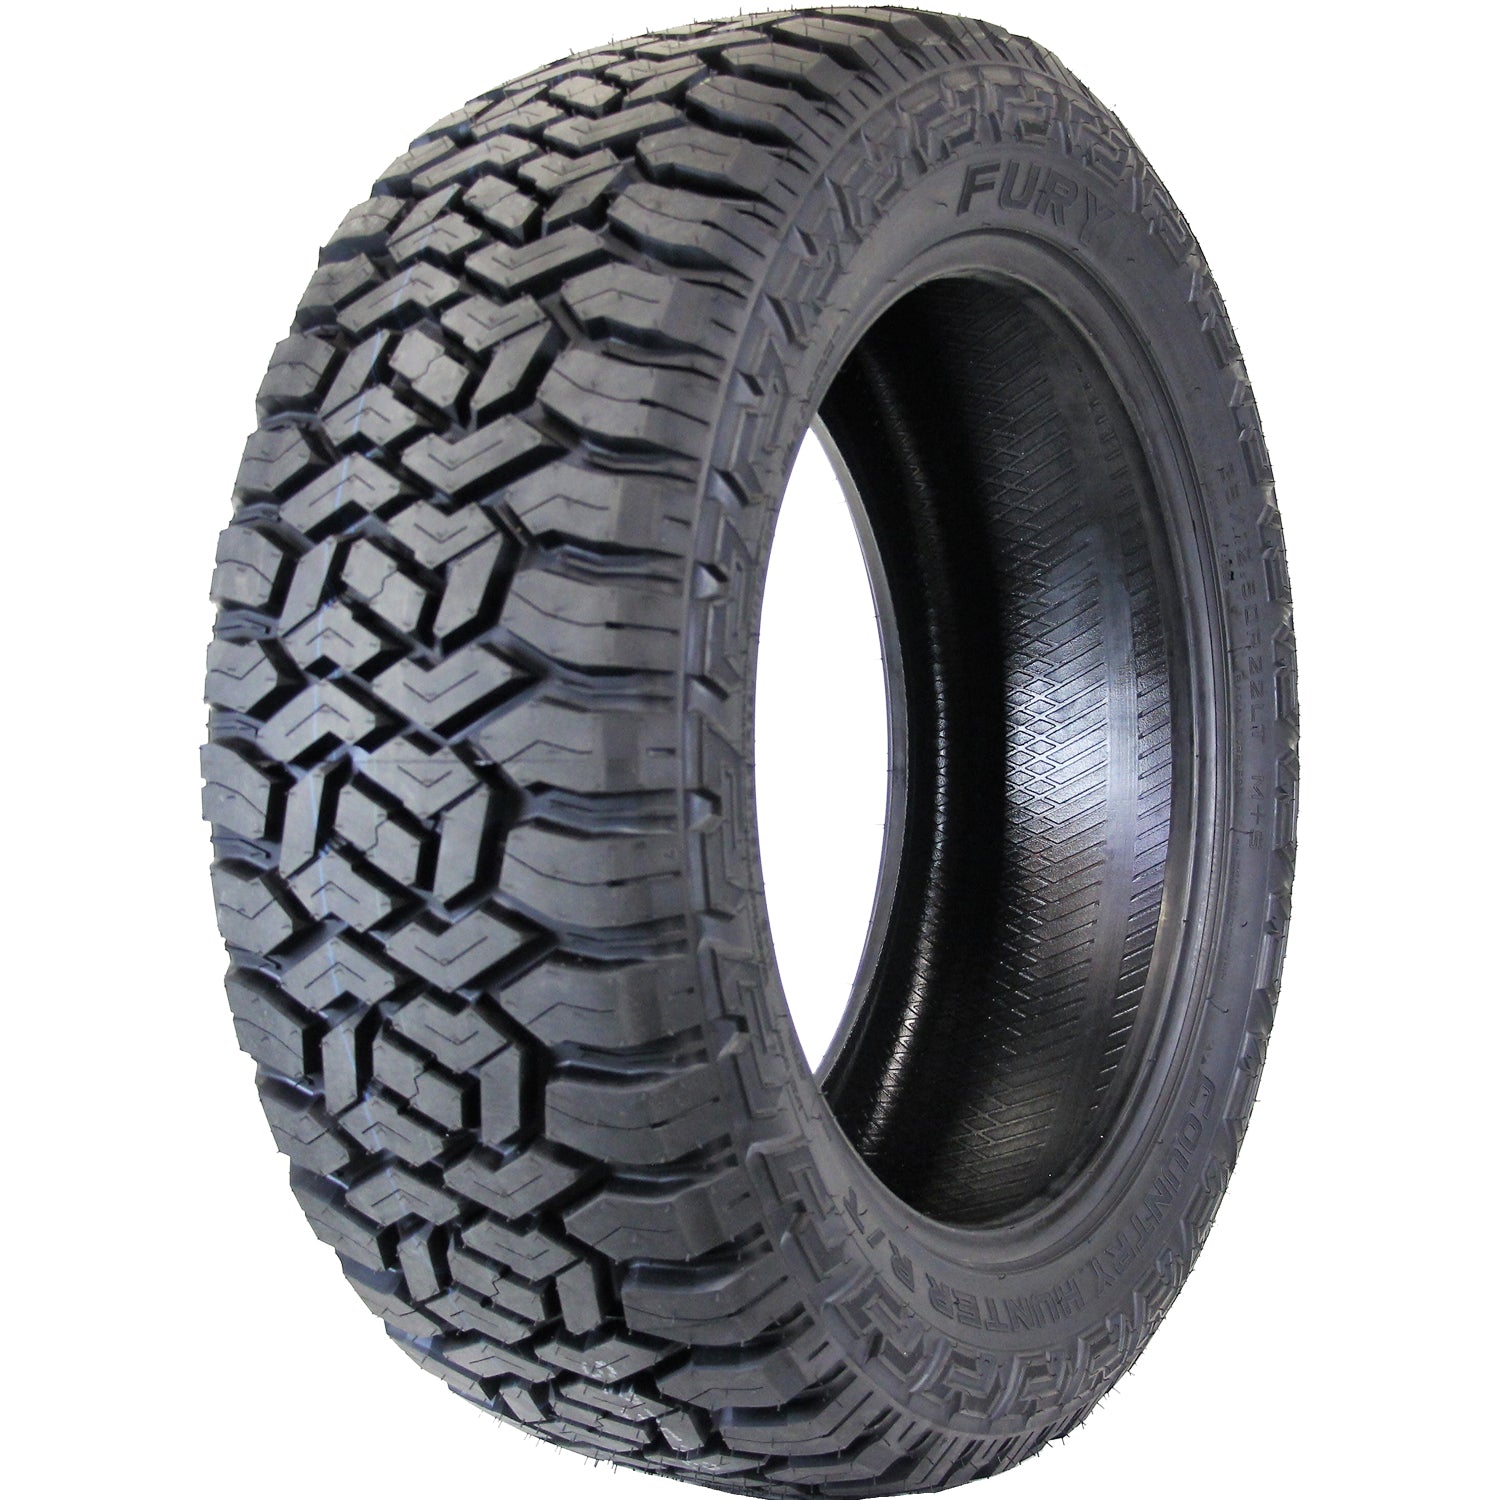 FURY OFFROAD COUNTRY HUNTER RT 37X12.50R17LT Tires